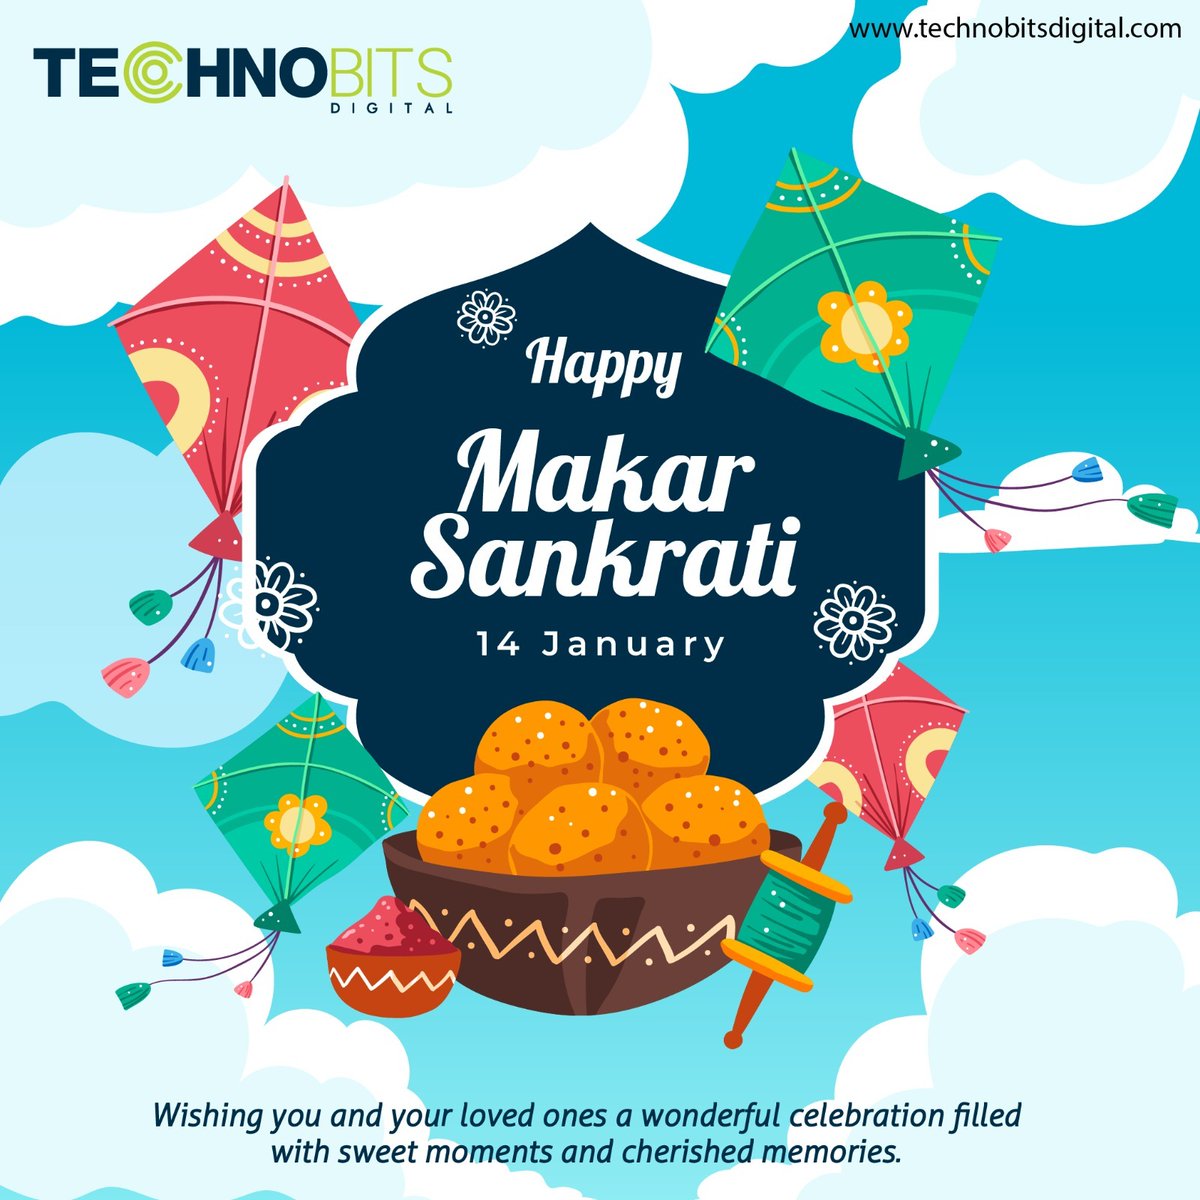 May the vibrant colors of the kites paint your life with happiness and prosperity. Wishing you and your loved ones a cheerful Makar Sankranti!📷📷
.
.
#happymakarsankrati #technobitsdigital #FestivalOfKites #evolgroup